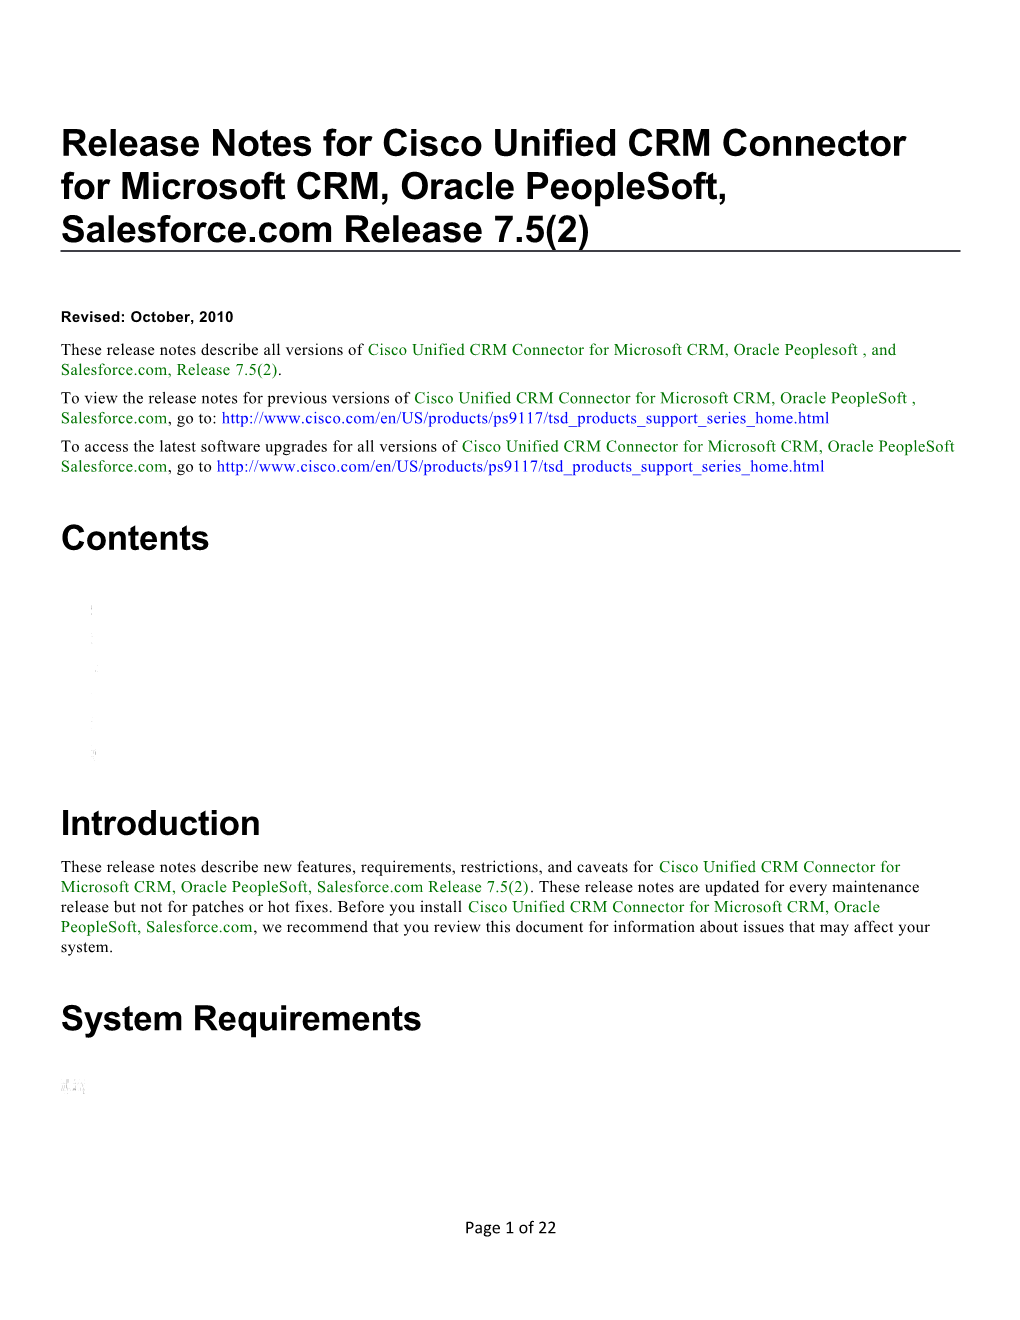 Release Notes for Cisco Unified CRM Connector for Microsoft CRM, Oracle Peoplesoft